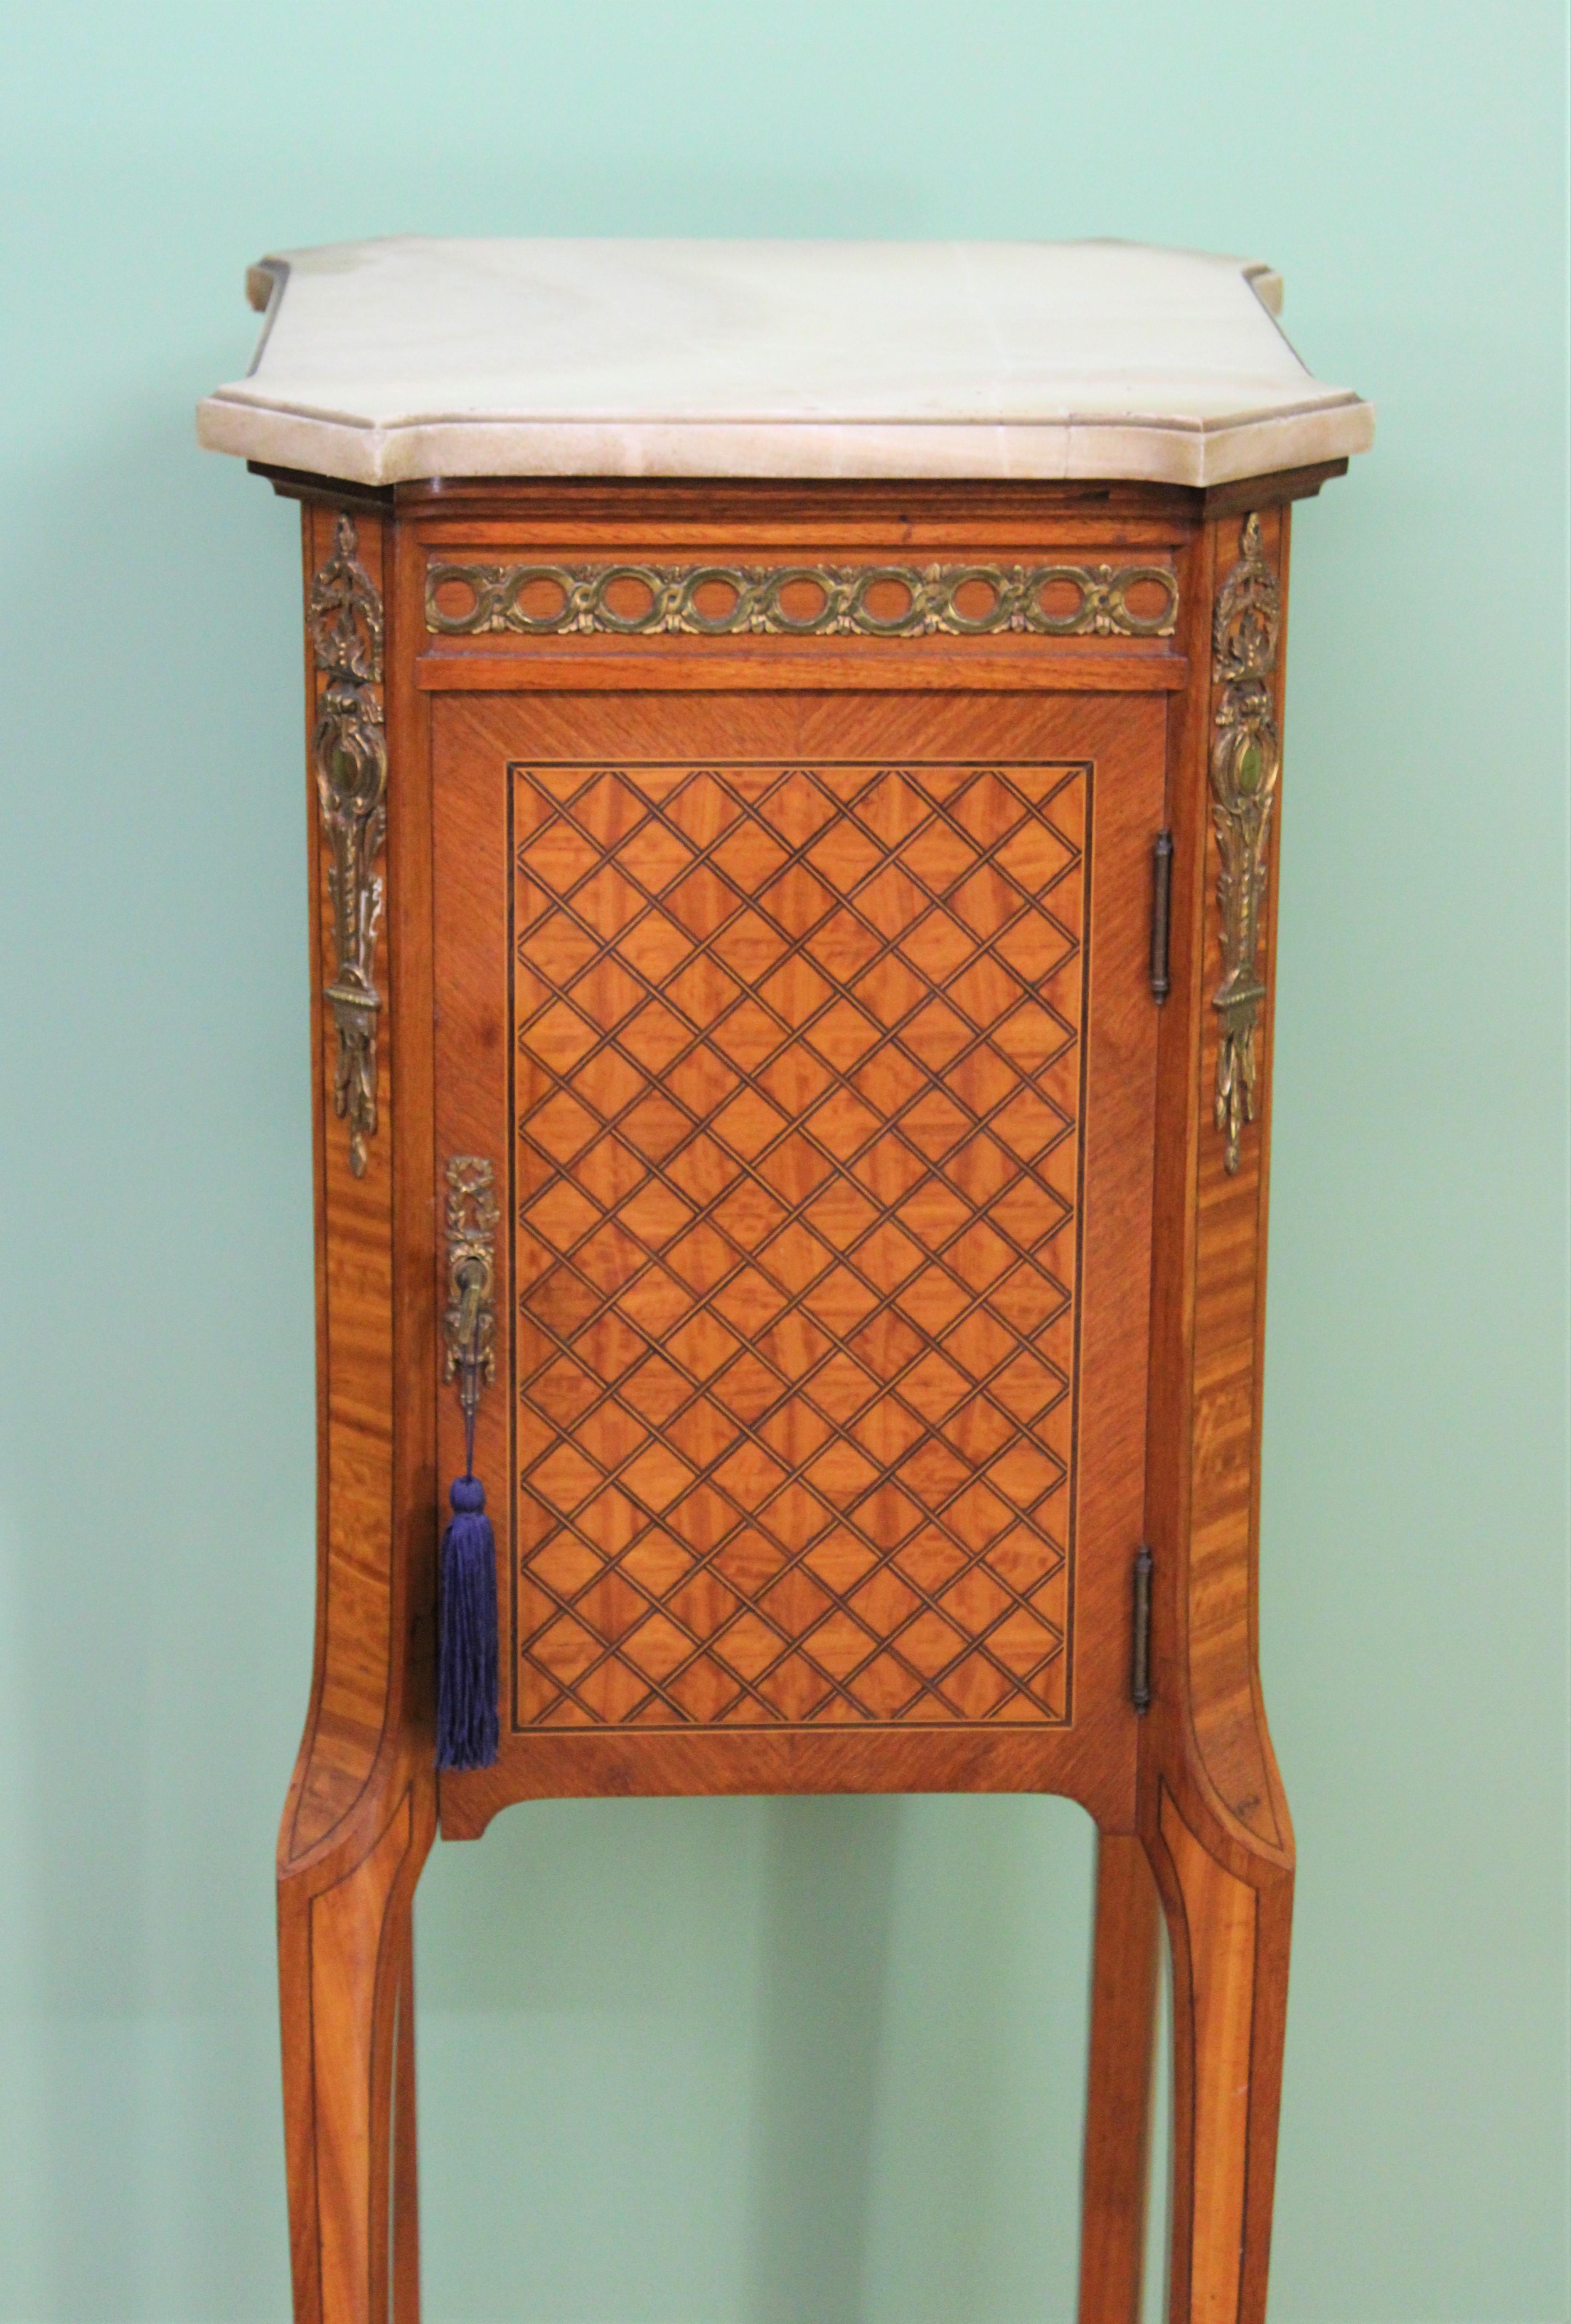 A splendid quality French marble topped cabinet in the Louis XVI style. Of fine construction in satinwood and kingwood and decorated with stunning inlaid parquetry work. Further embellished with crisply cast brass mounts. There is a shaped marble